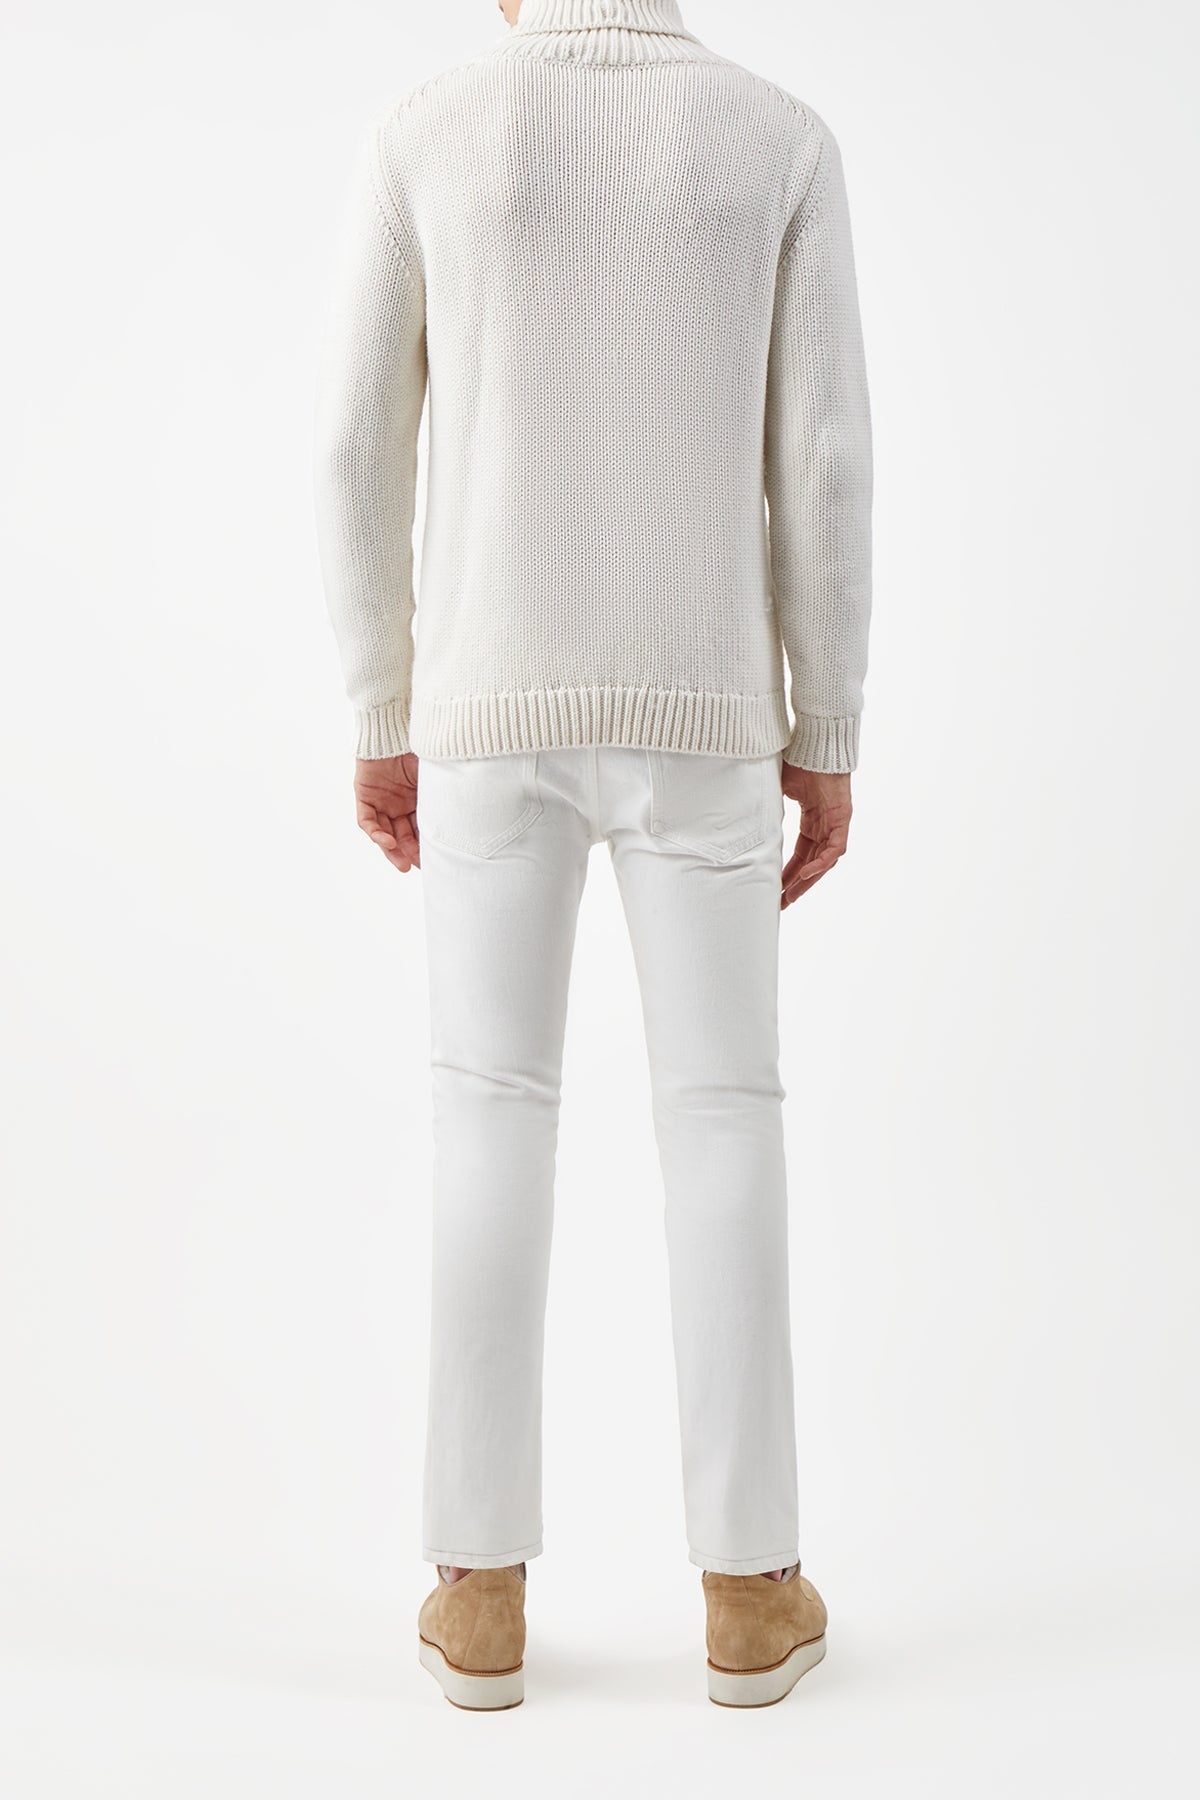 Sal Knit Sweater in Ivory Cashmere - 4